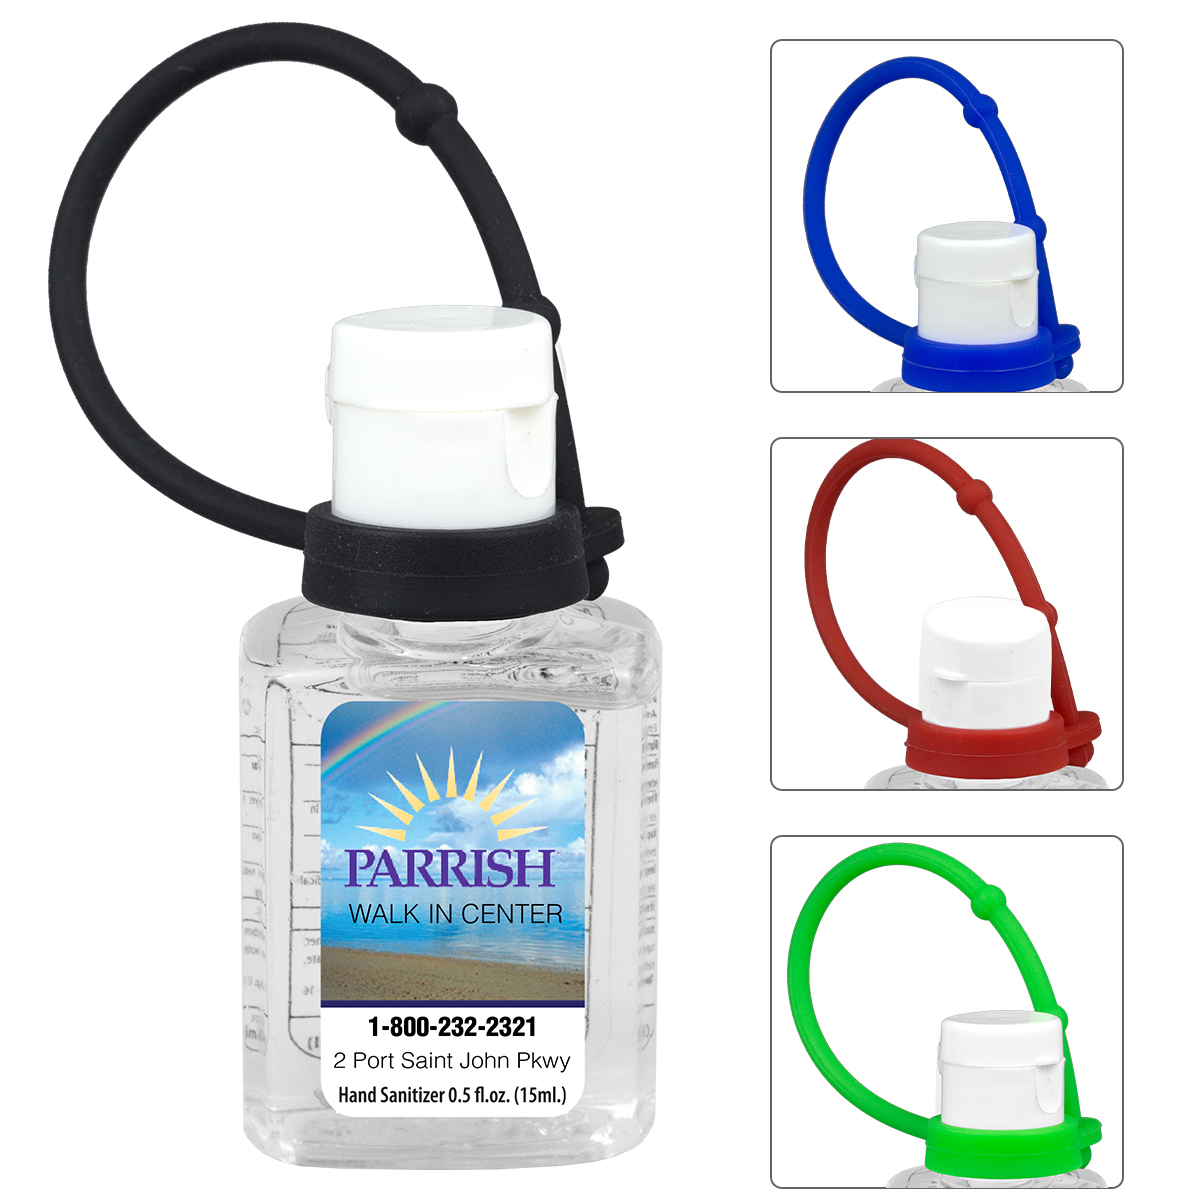 “SanPal S Connect” 0.5 oz Compact Hand Sanitizer Antibacterial Gel in Flip-Top Squeeze Bottle with Colorful Silicone Leash